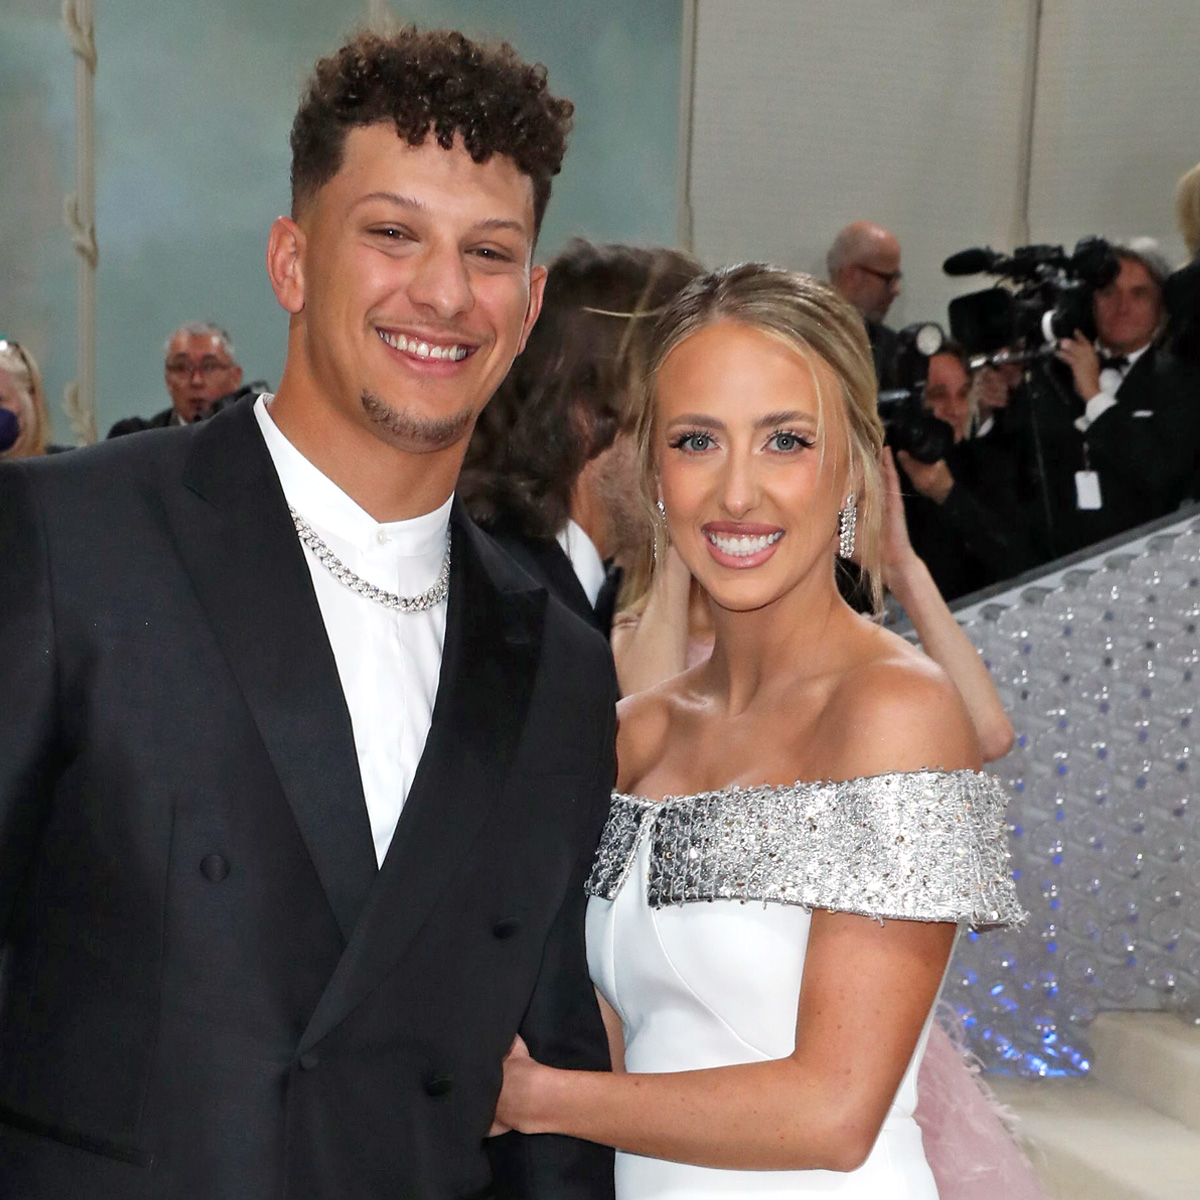 Patrick Mahomes Says Wife Brittany Has a “Good Sense” on Handling Hate